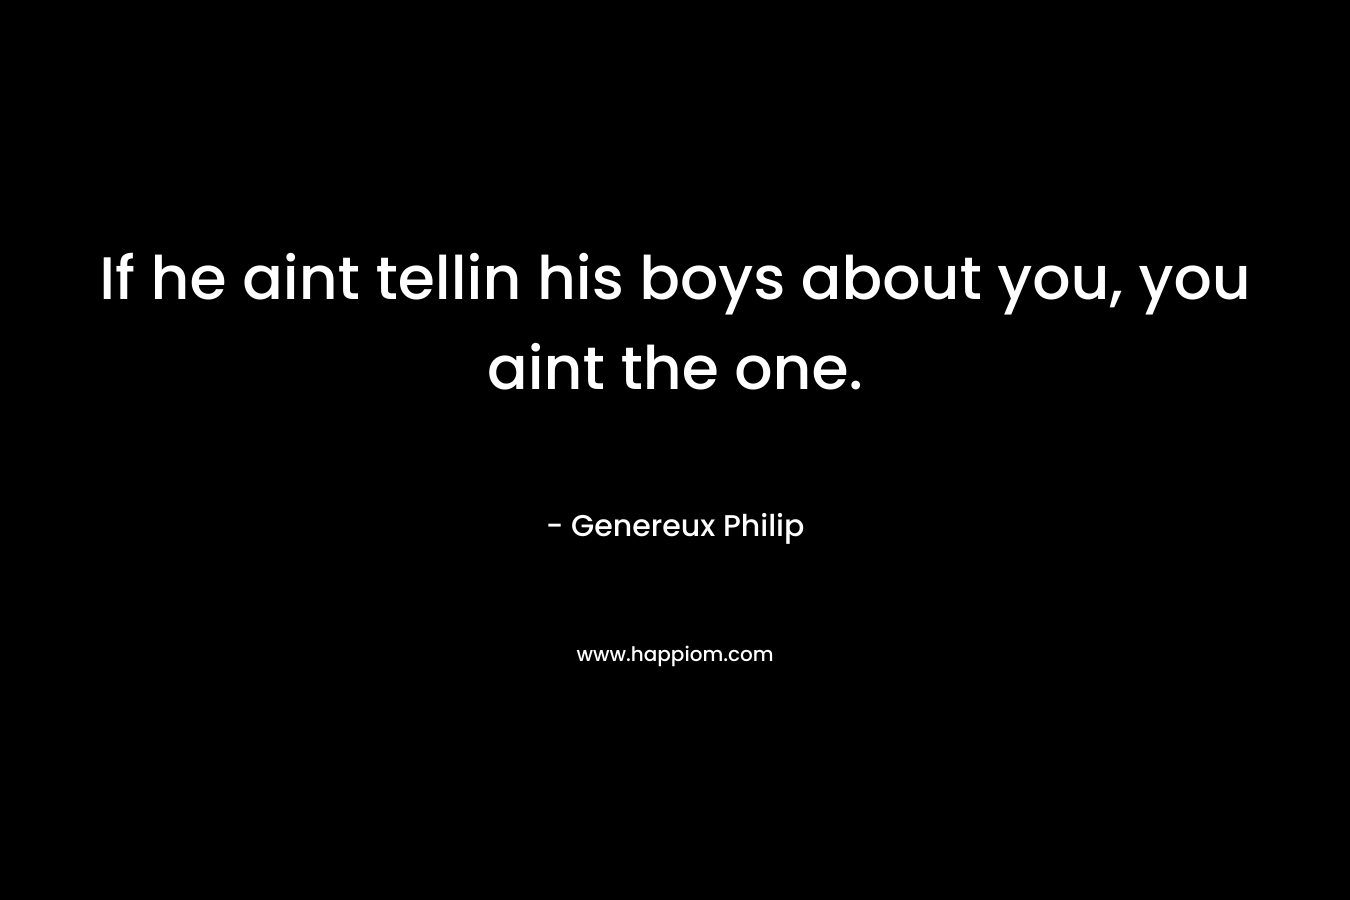 If he aint tellin his boys about you, you aint the one.